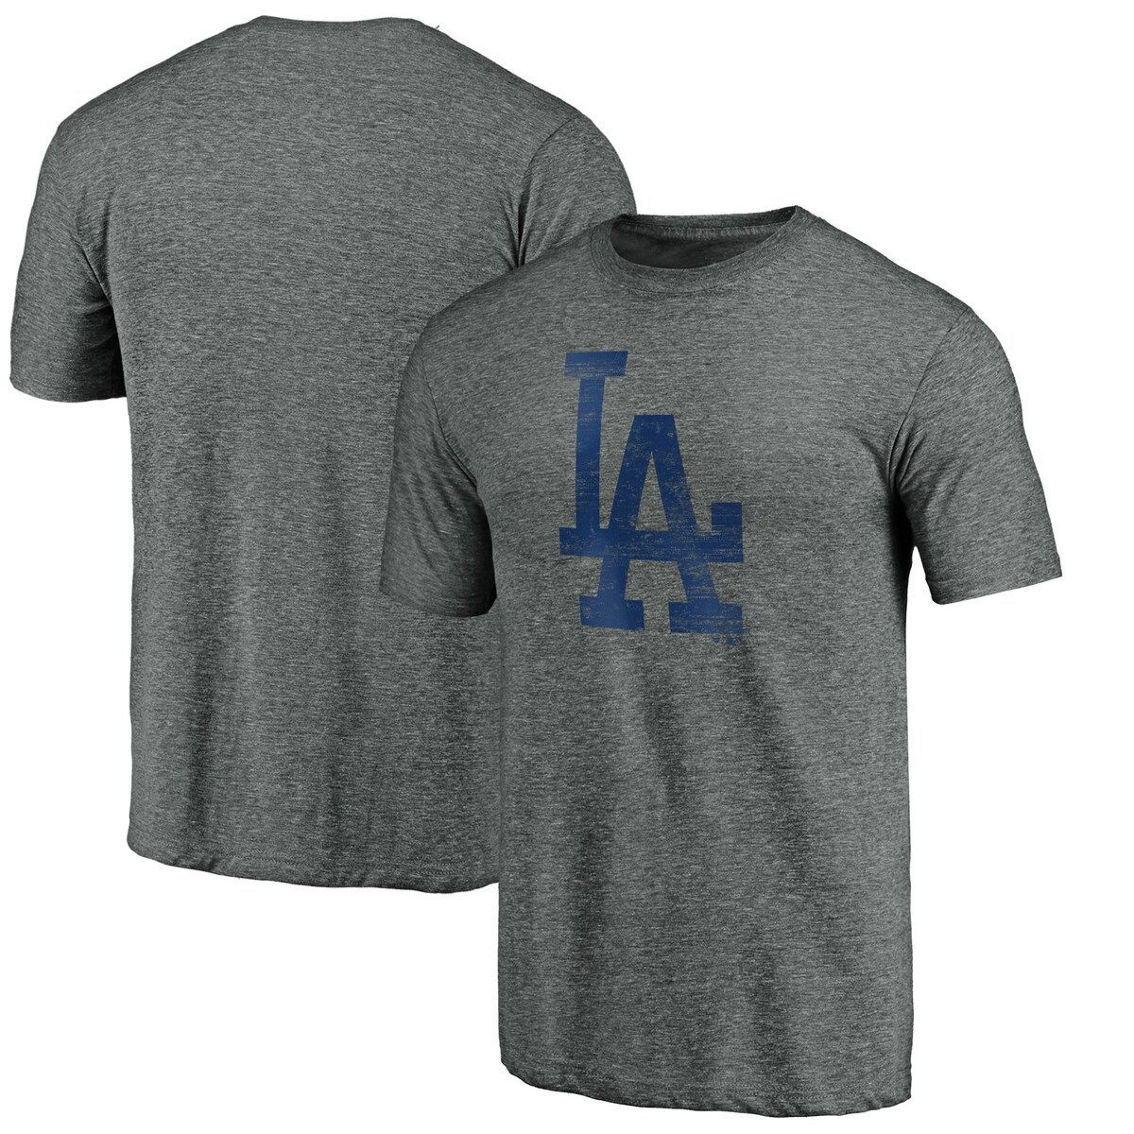 Fanatics Branded Men's Heathered Gray Los Angeles Dodgers Weathered Official Logo Tri-Blend T-Shirt - Image 2 of 4